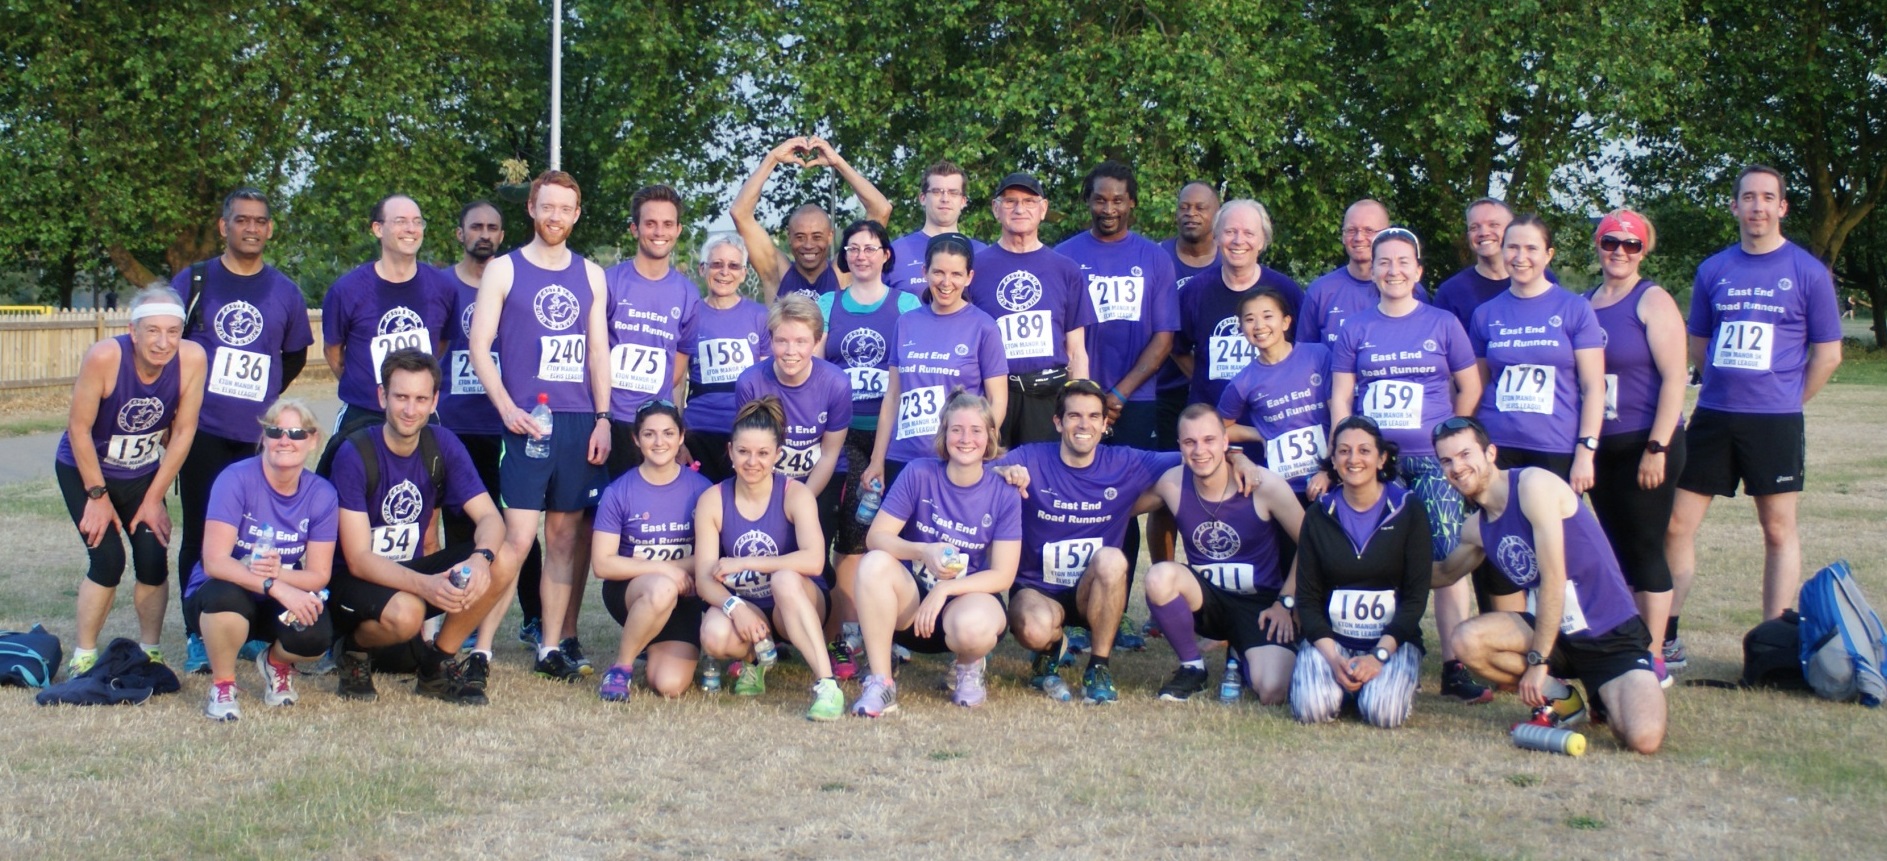 A group photo of EastEndRoad Runners